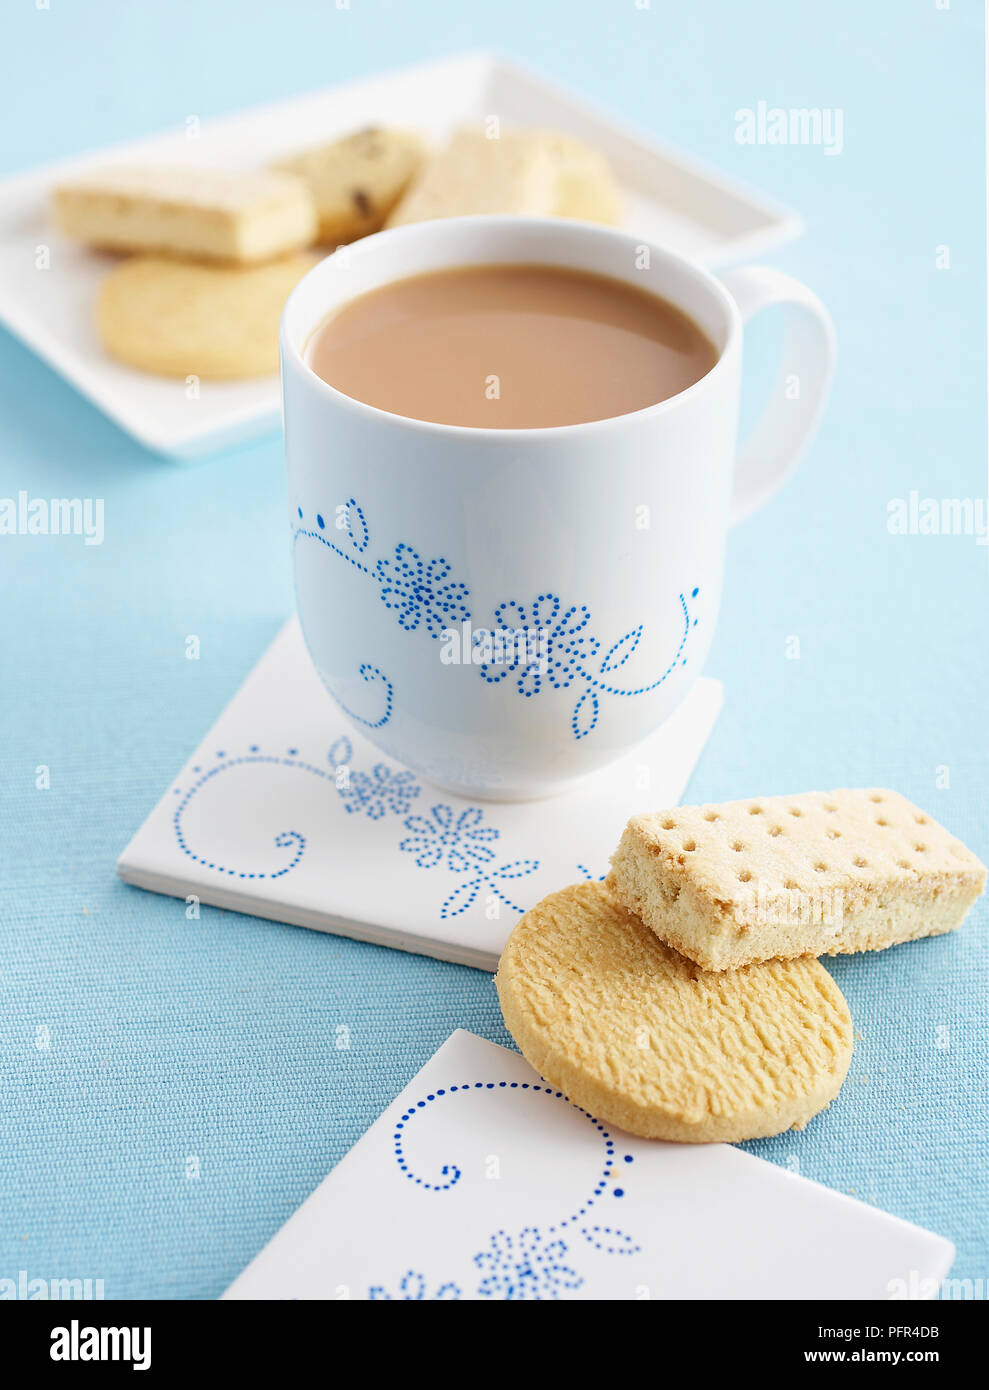 Cup of milky tea, butter biscuits and shortbread, Dot decorated cup and coaster Stock Photo